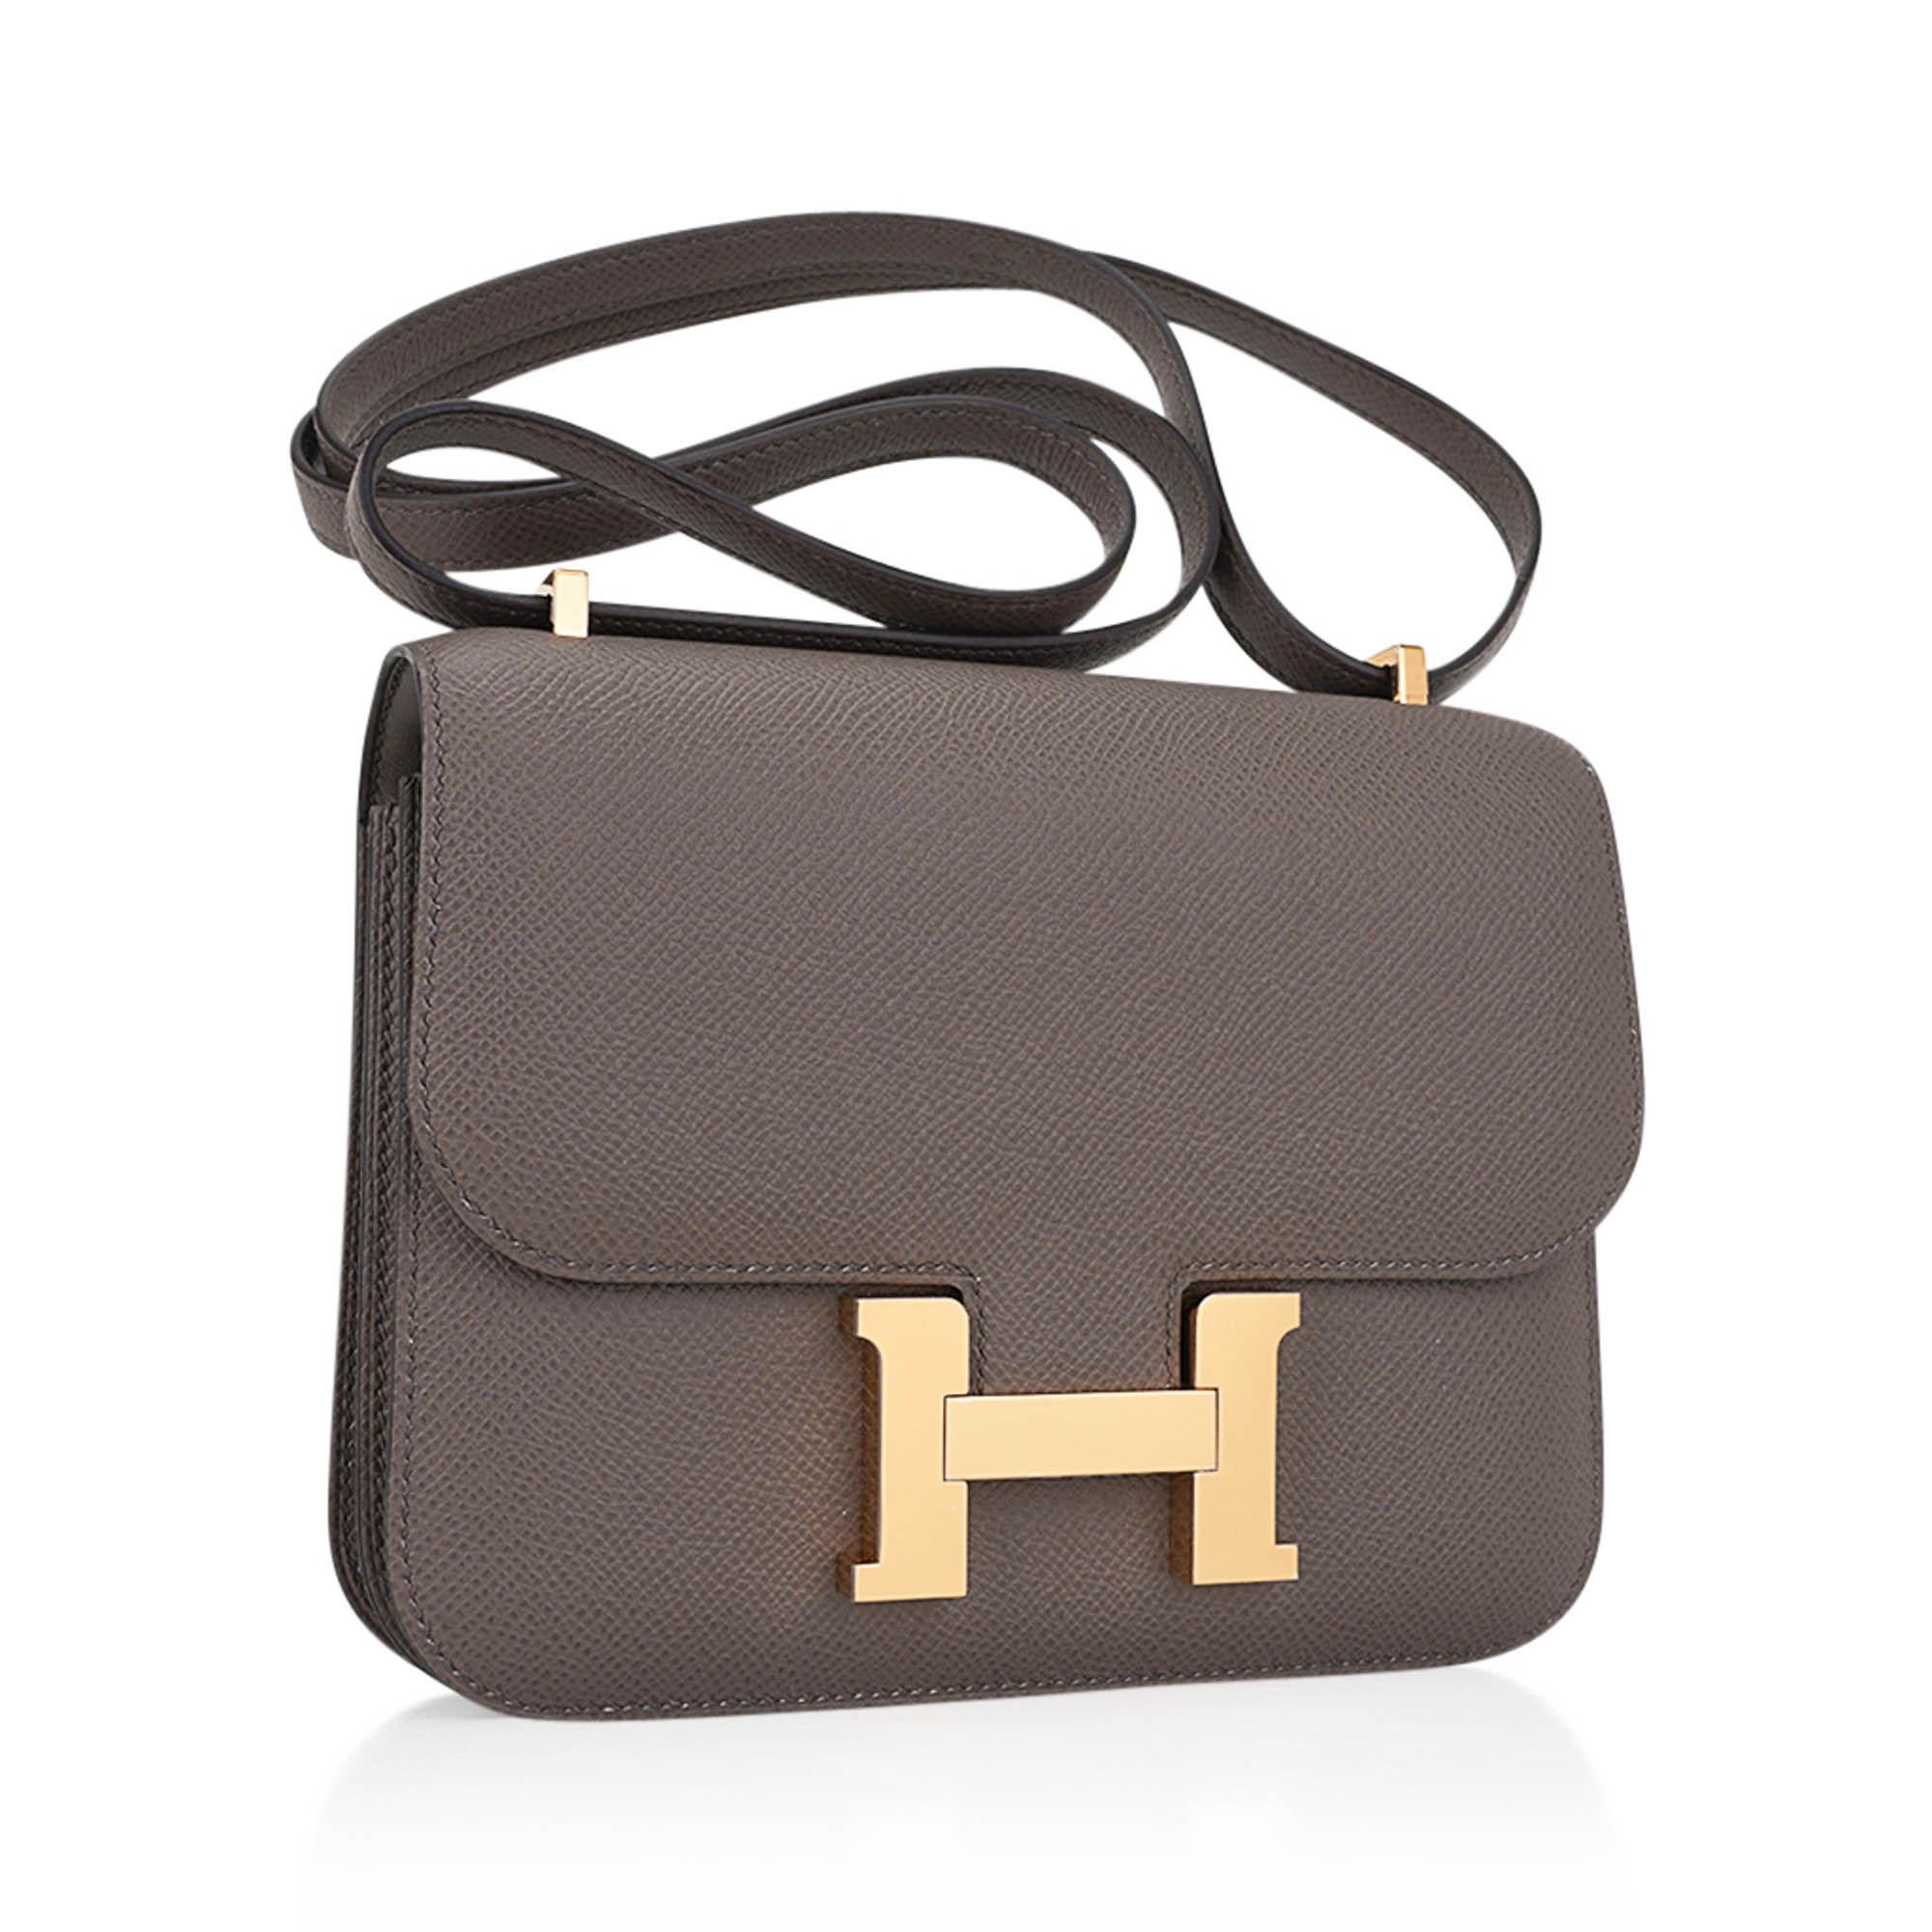 Mightychic offers an Hermes Constance 18 bag featured in Etain.
Epsom leather in warm neutral Gray accentuated with gold hardware.
A fabulous year round colour.
HERMES PARIS MADE IN FRANCE is stamped on front under flap.
Comes with Hermes sleeper